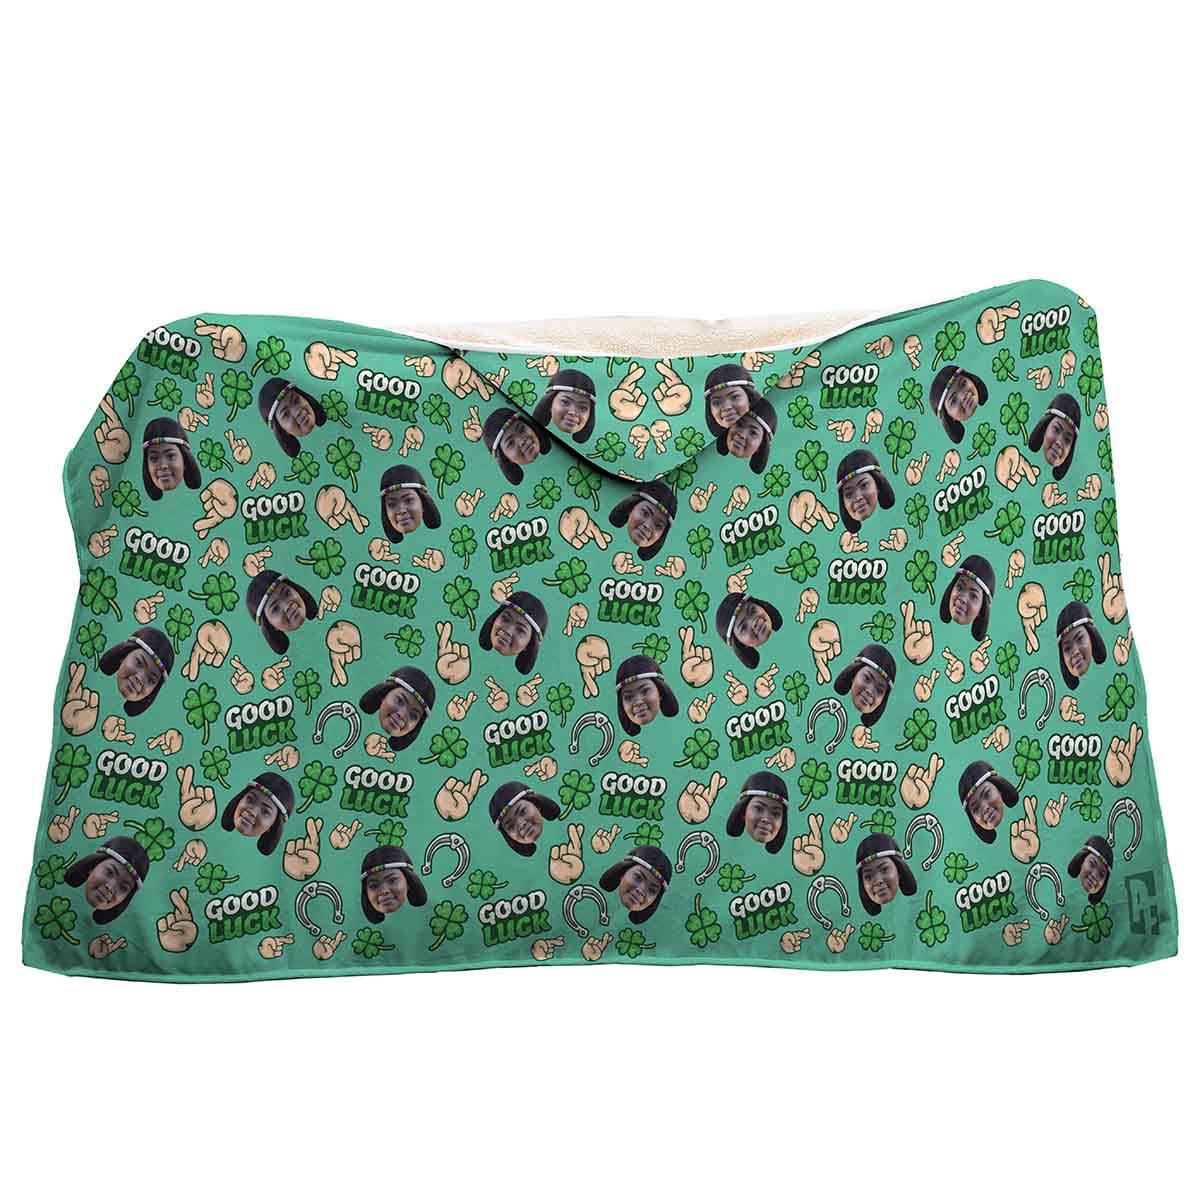 Mint Good Luck personalized hooded blanket with photo of face printed on it